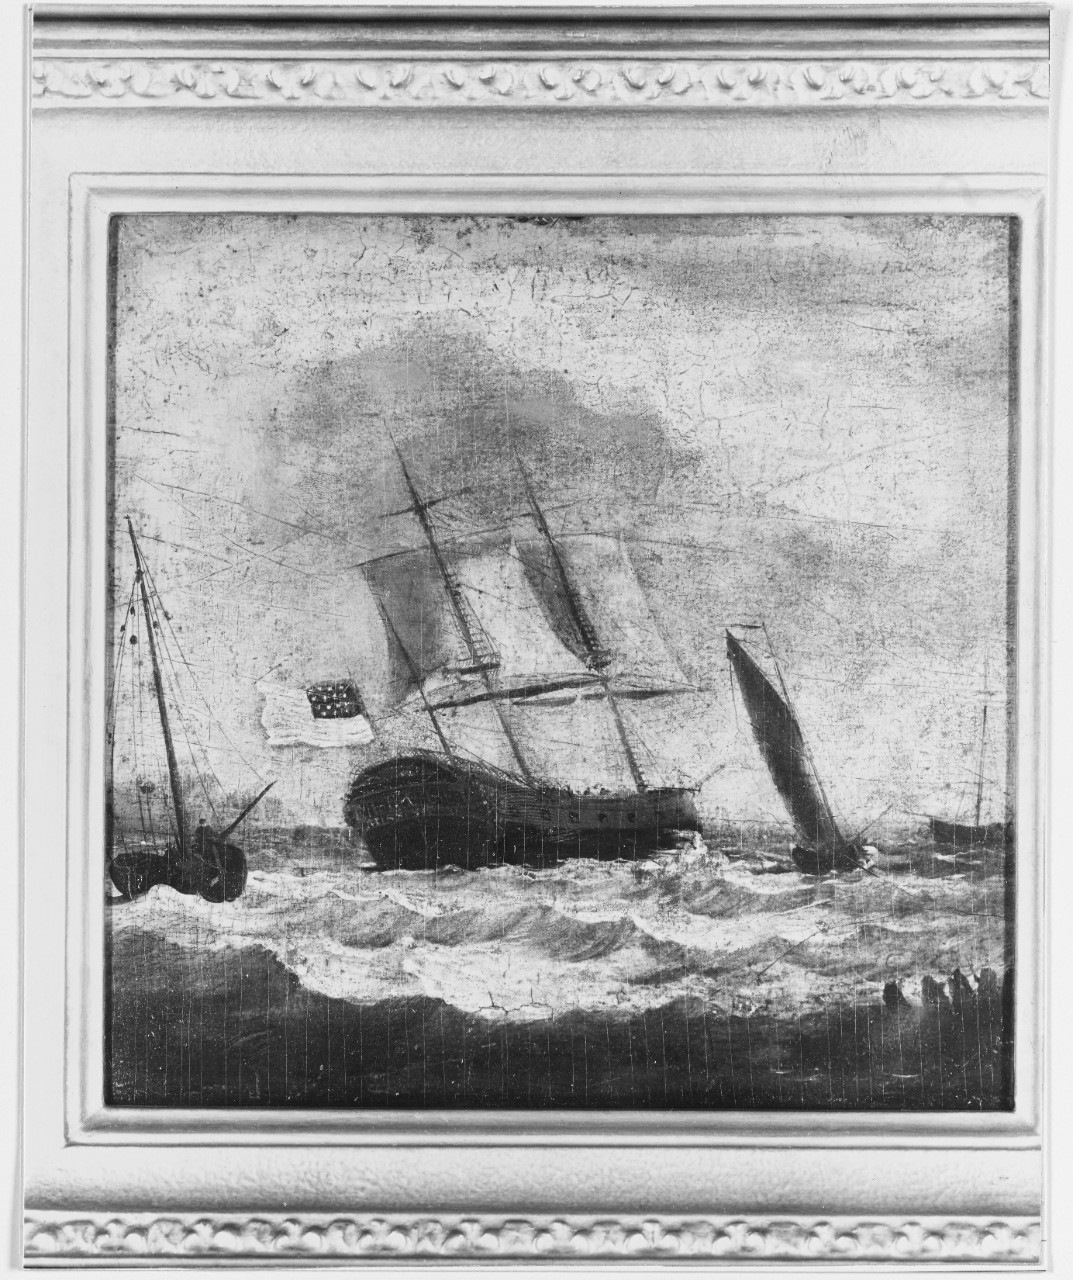 American Armed Merchant Ship MISSISSIPPI